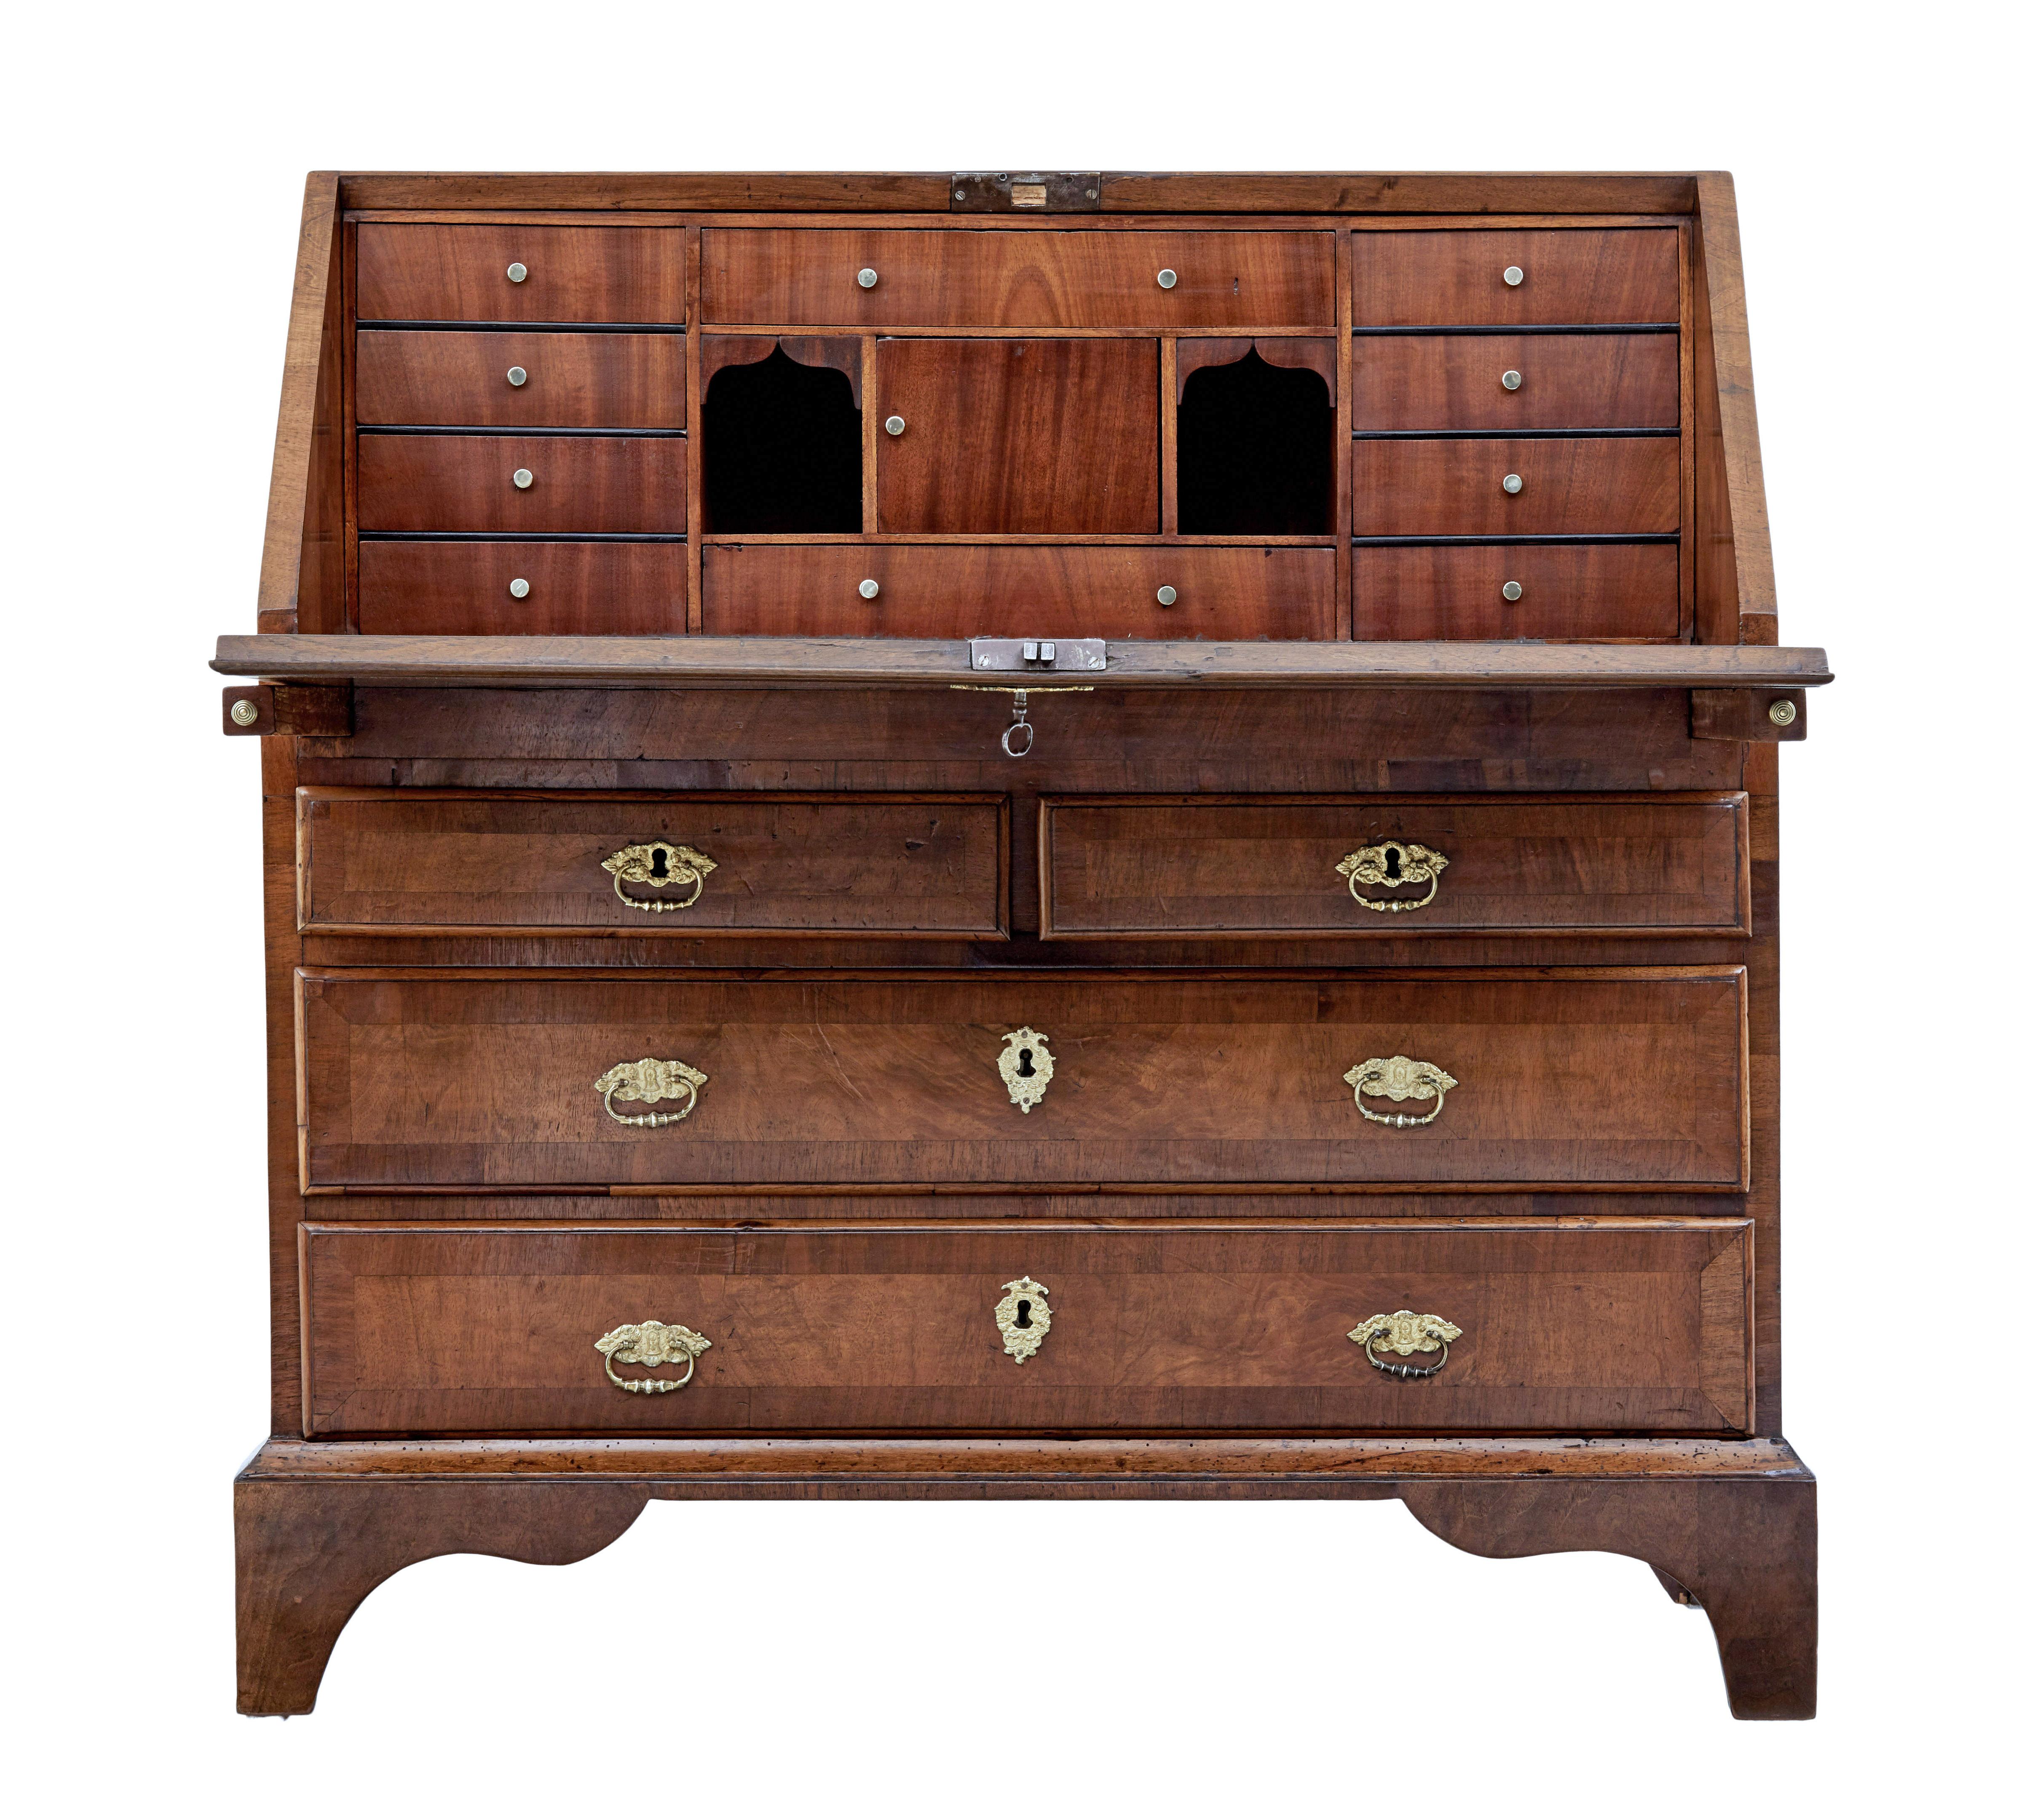 Danish 18th century walnut bureau writing desk, circa 1730.

Good quality burr walnut Danish bureau. Rare to find a Scandinavian example with an interior well.

Bureau comprises of the fall and 2 over 2 drawers, all cross banded in walnut. Fall